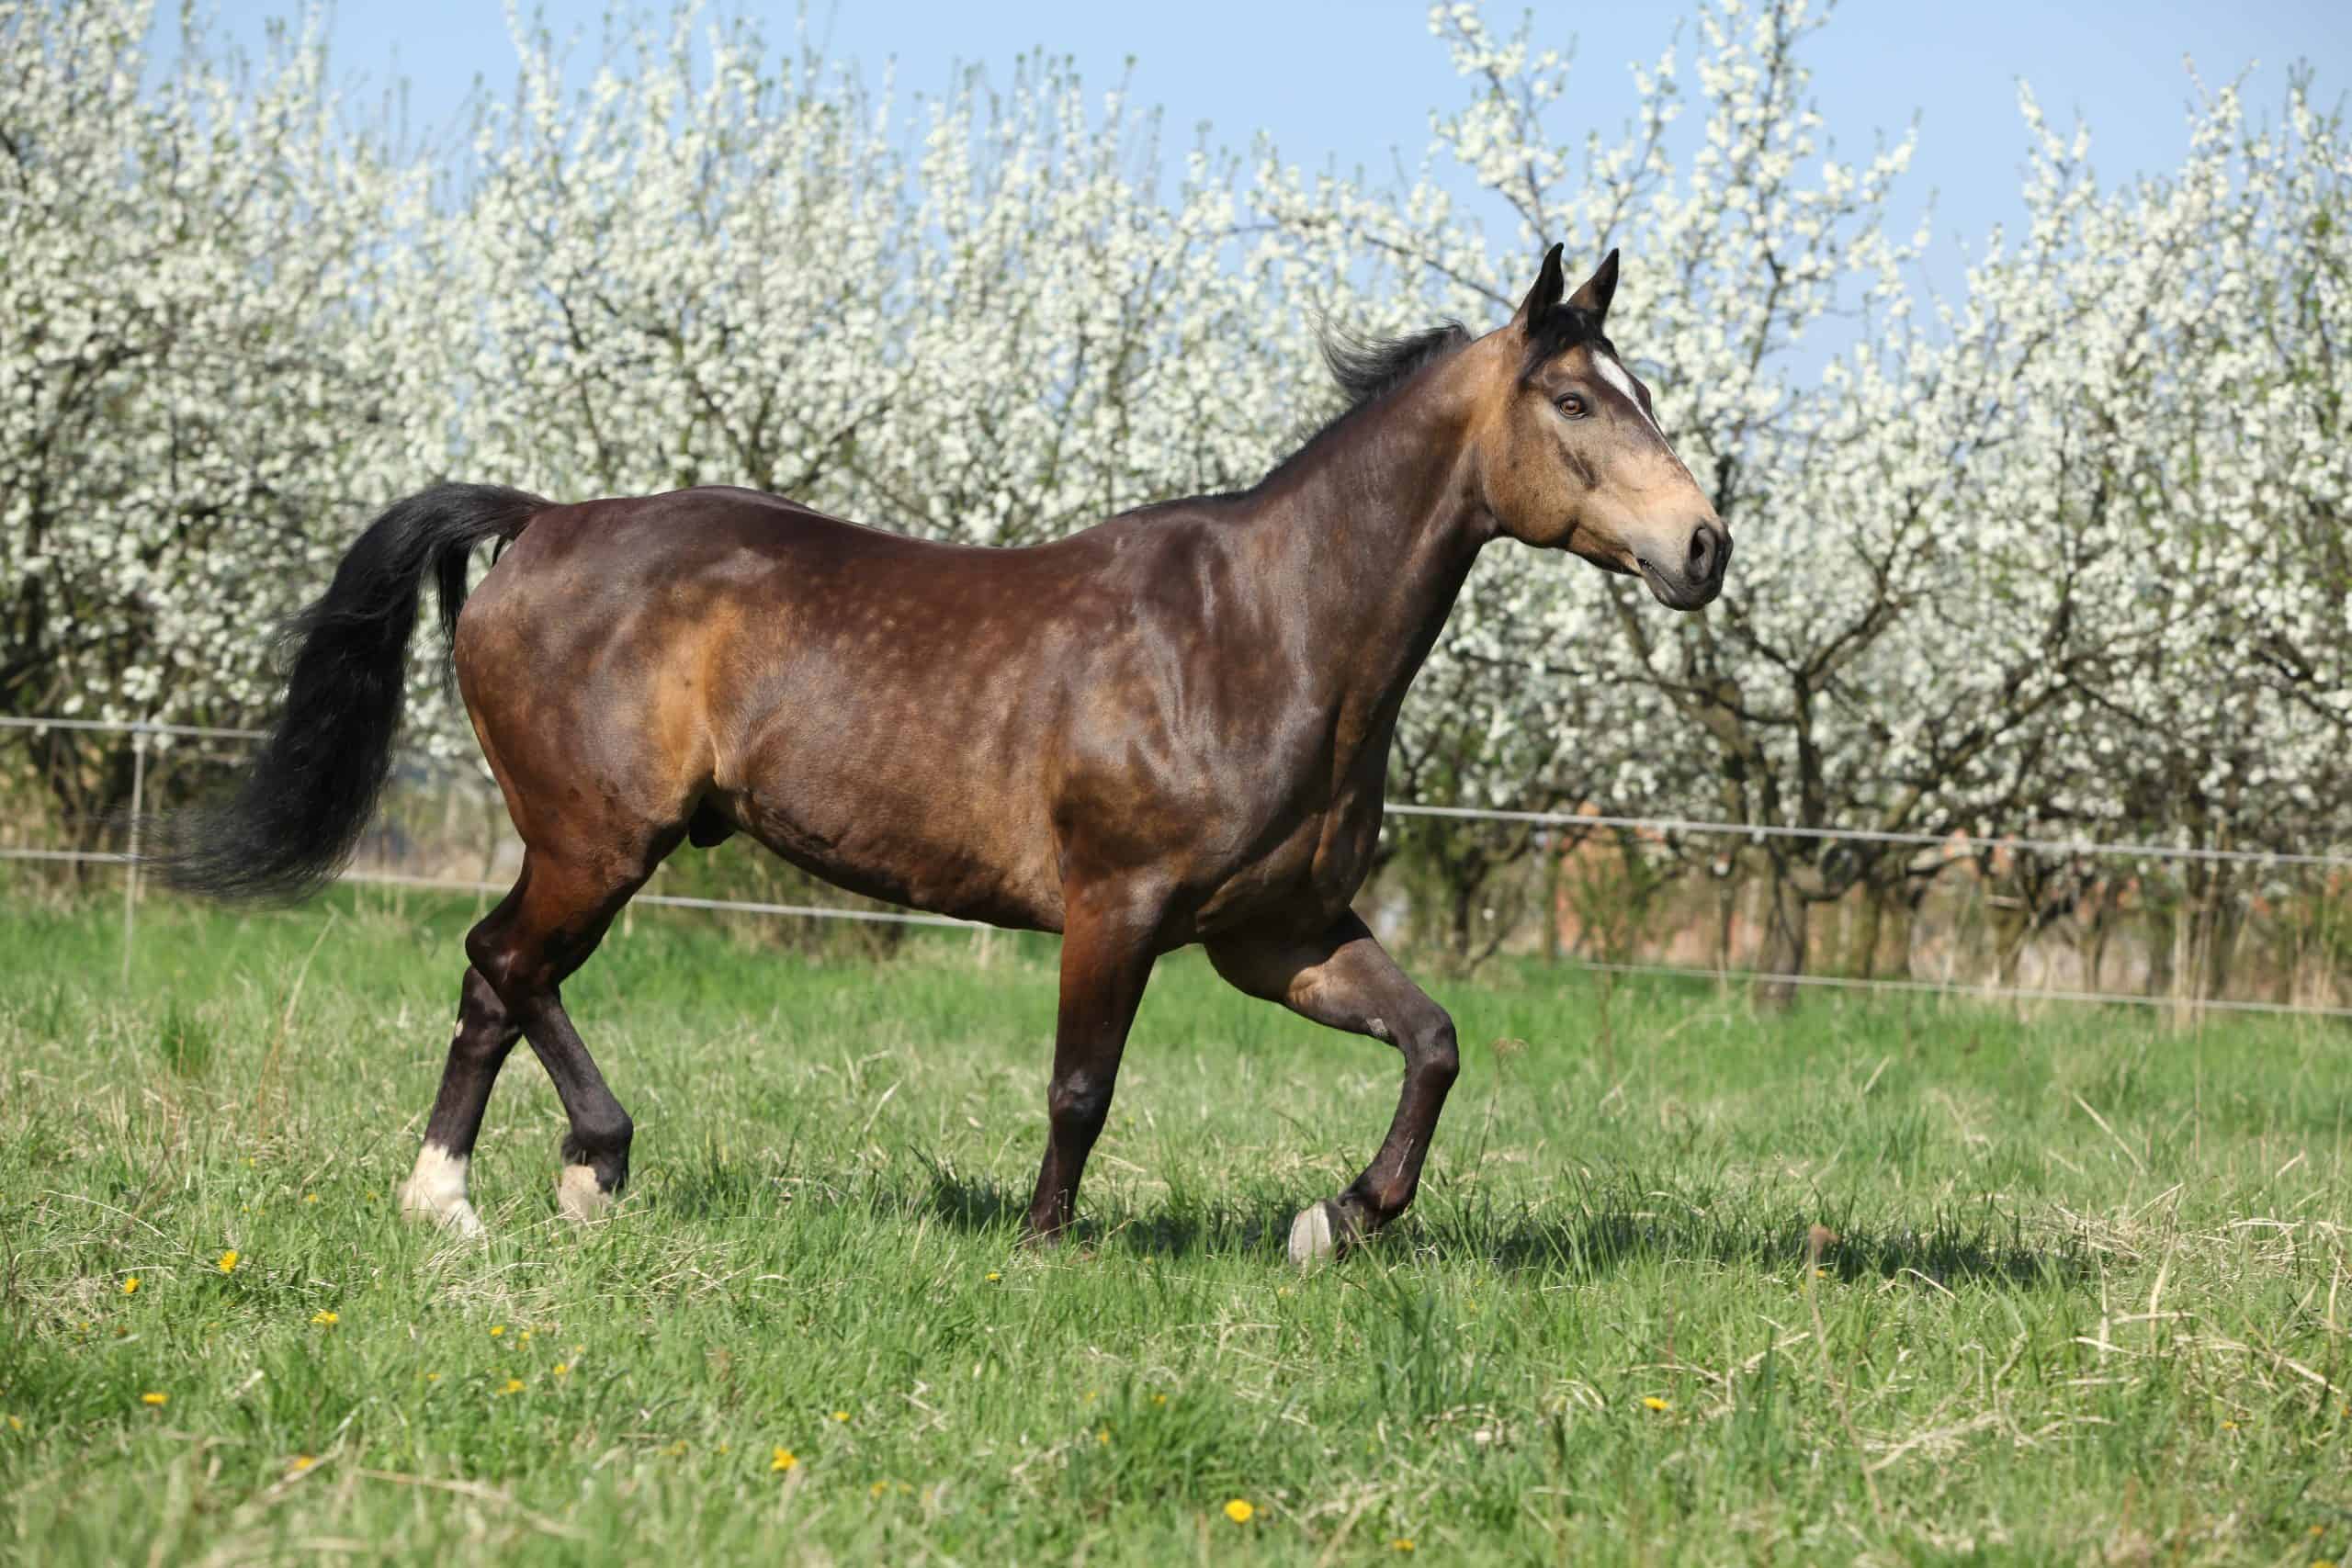 Quarter horse running in front of flowering plum trees on green pasturage